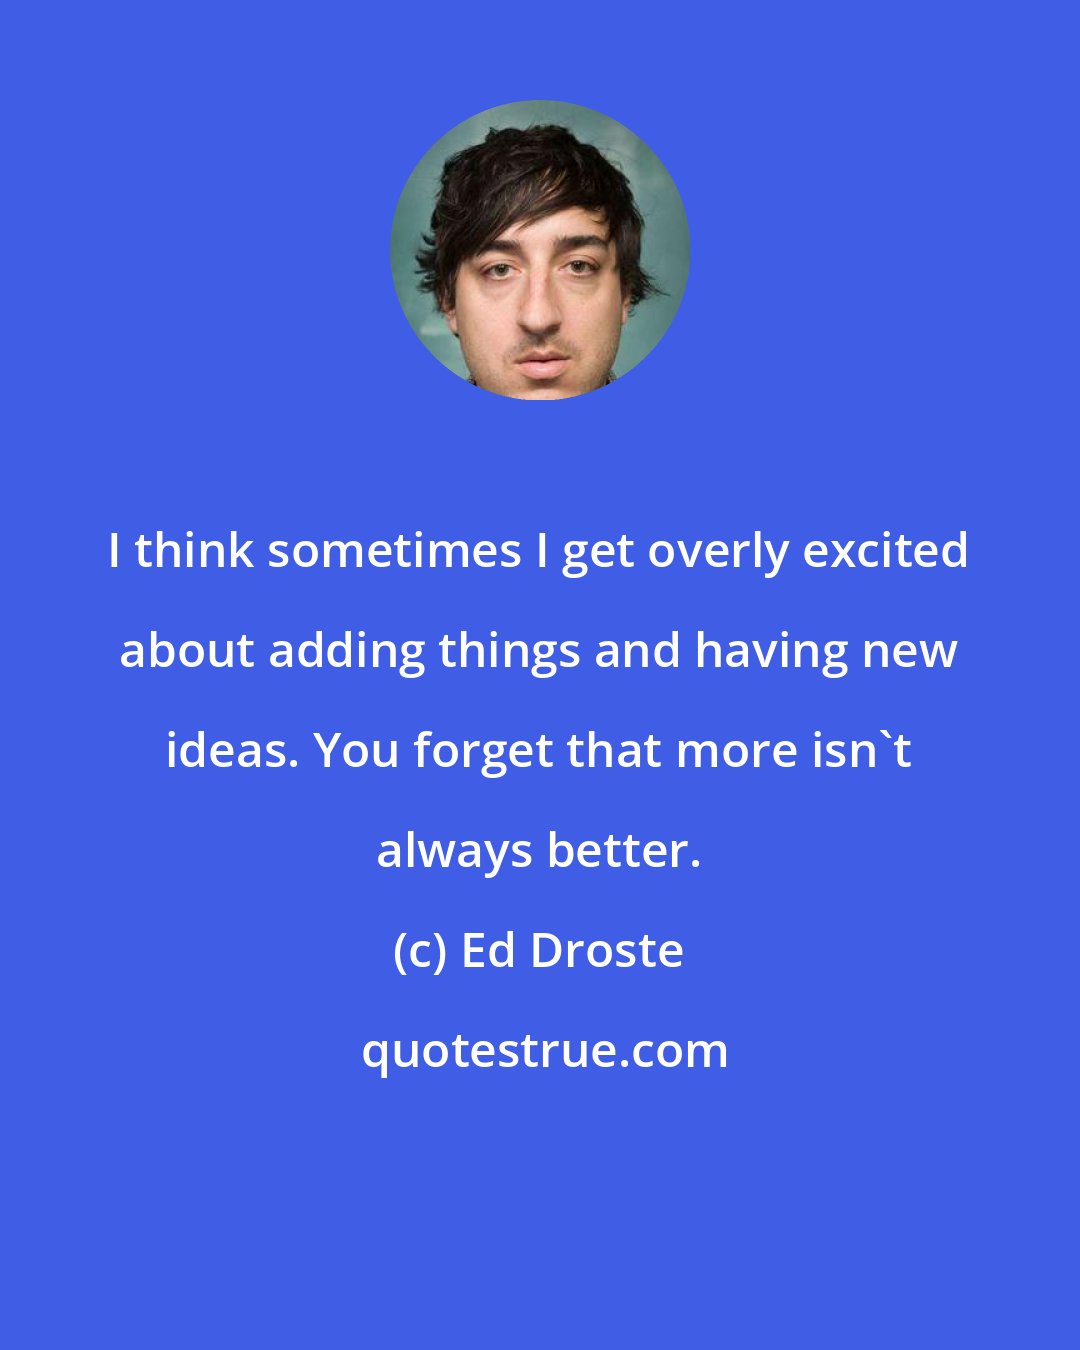 Ed Droste: I think sometimes I get overly excited about adding things and having new ideas. You forget that more isn't always better.